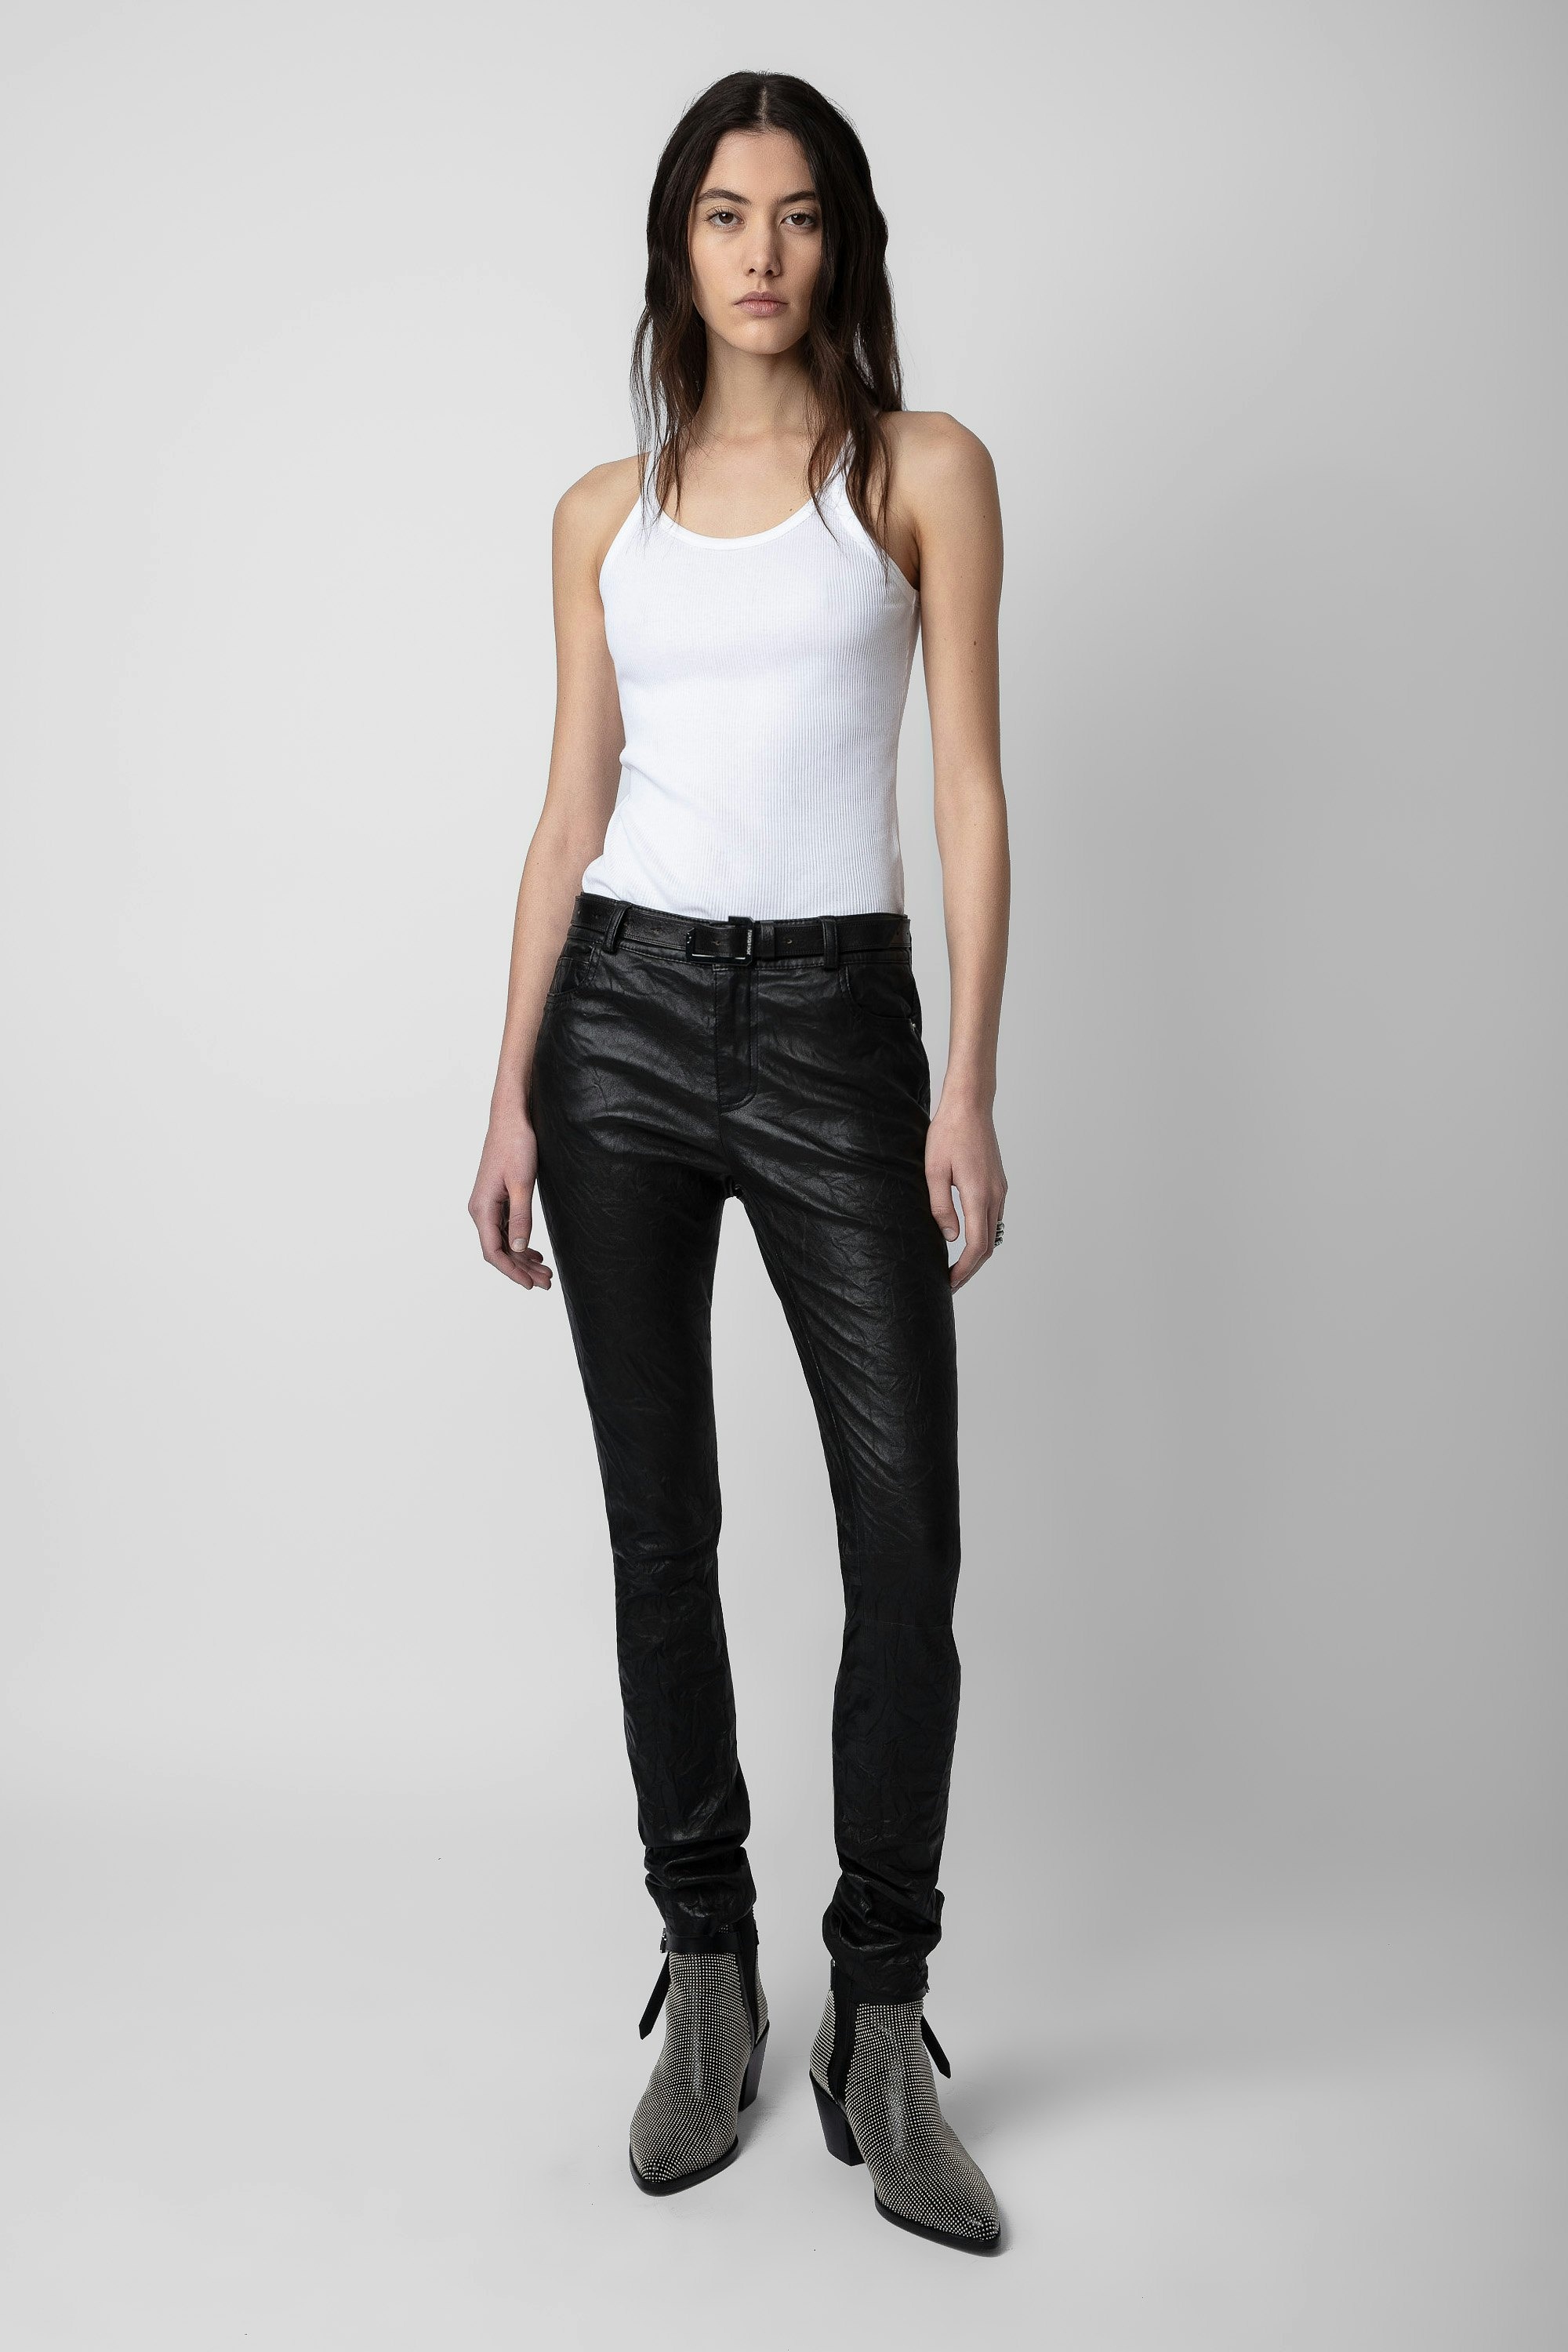 Phlame Crinkle Leather Pants - 3